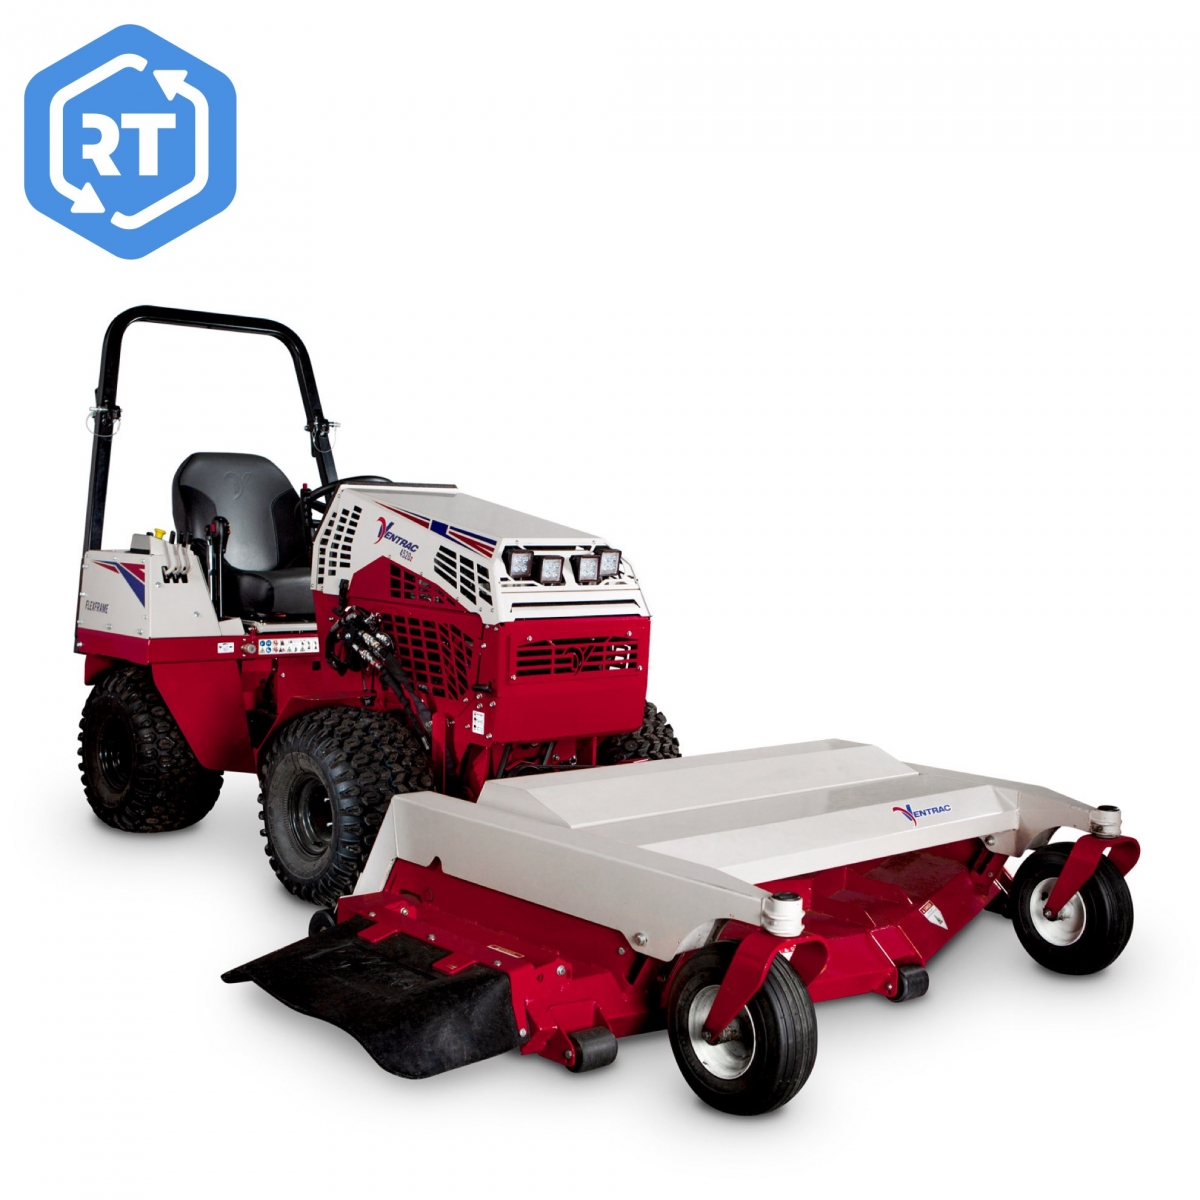 Ventrac 4520Y with 72" Finishing Mower Deck